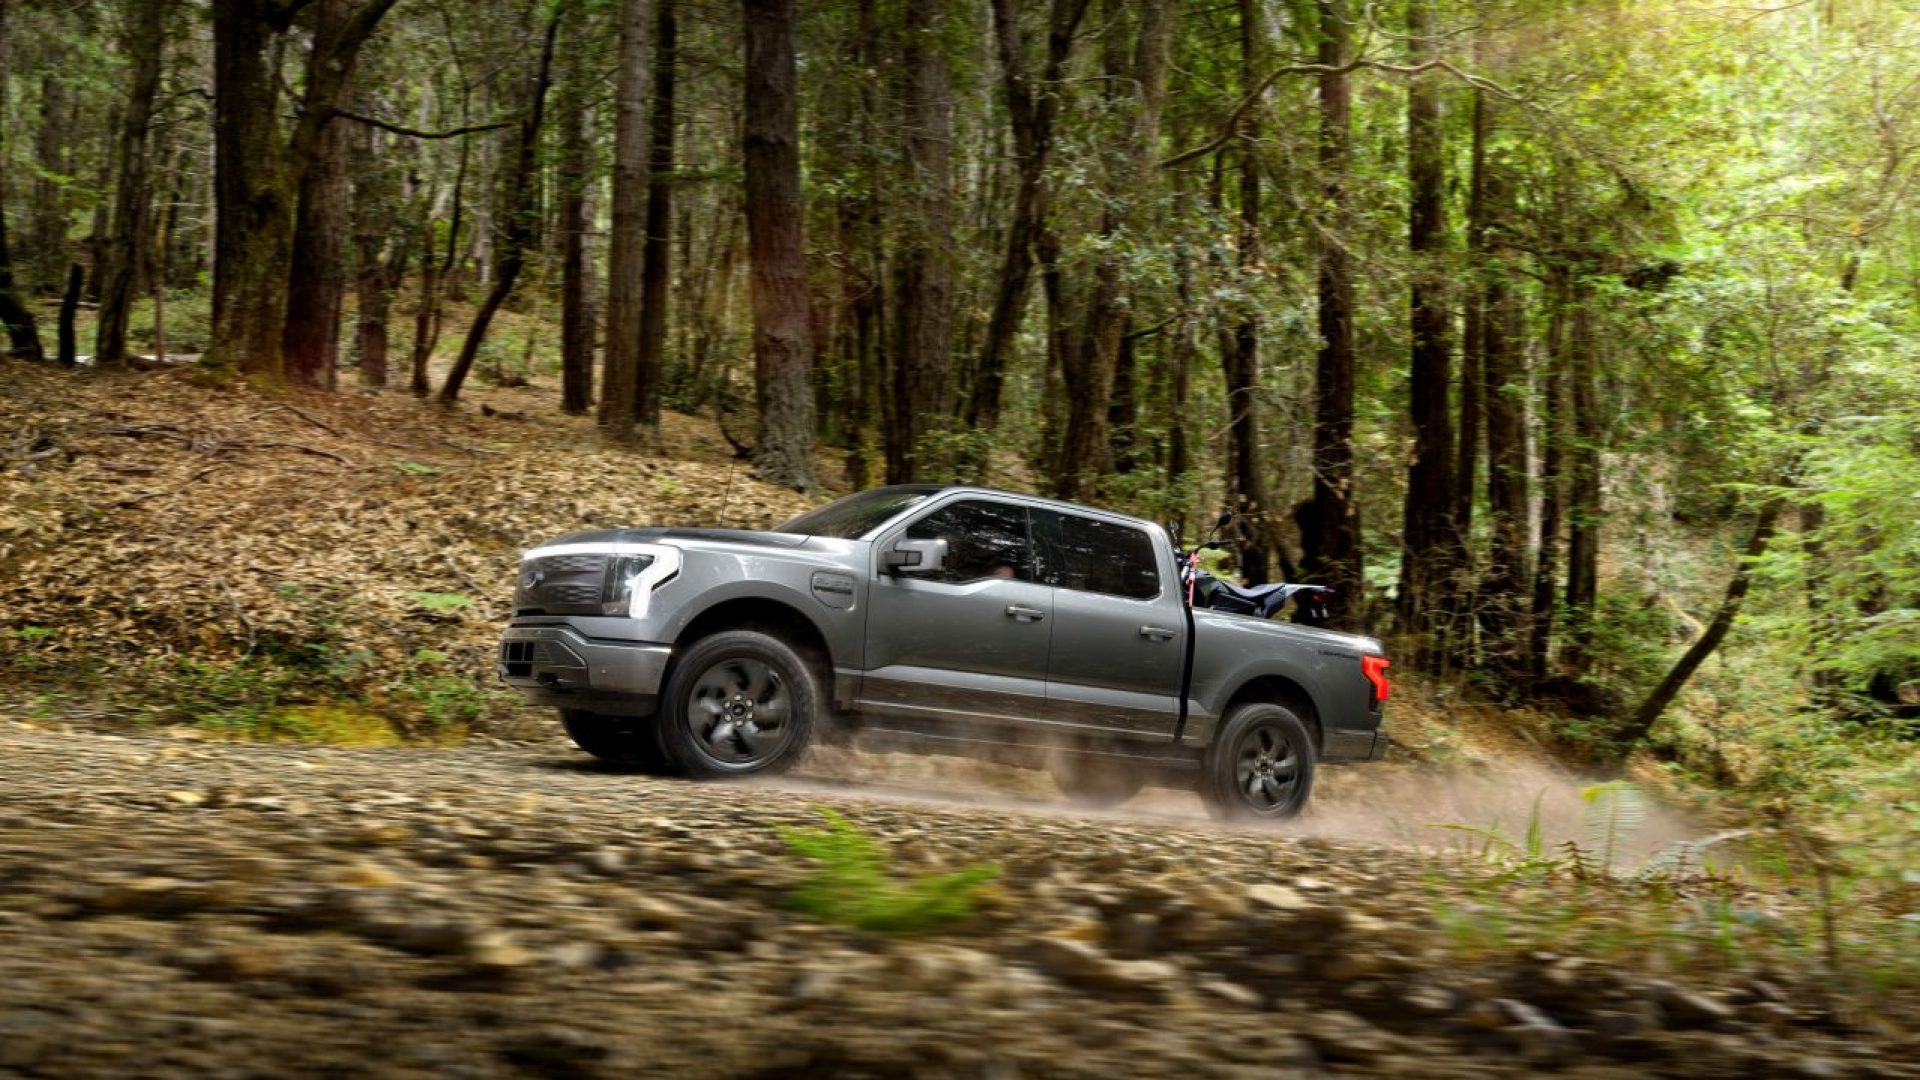 2022 Ford F-150 Lightning Lariat. Pre-production model with available features shown. Available starting spring 2022. Always consult the owner’s manual before off-road driving, know your terrain and trail difficulty and use appropriate safety gear.